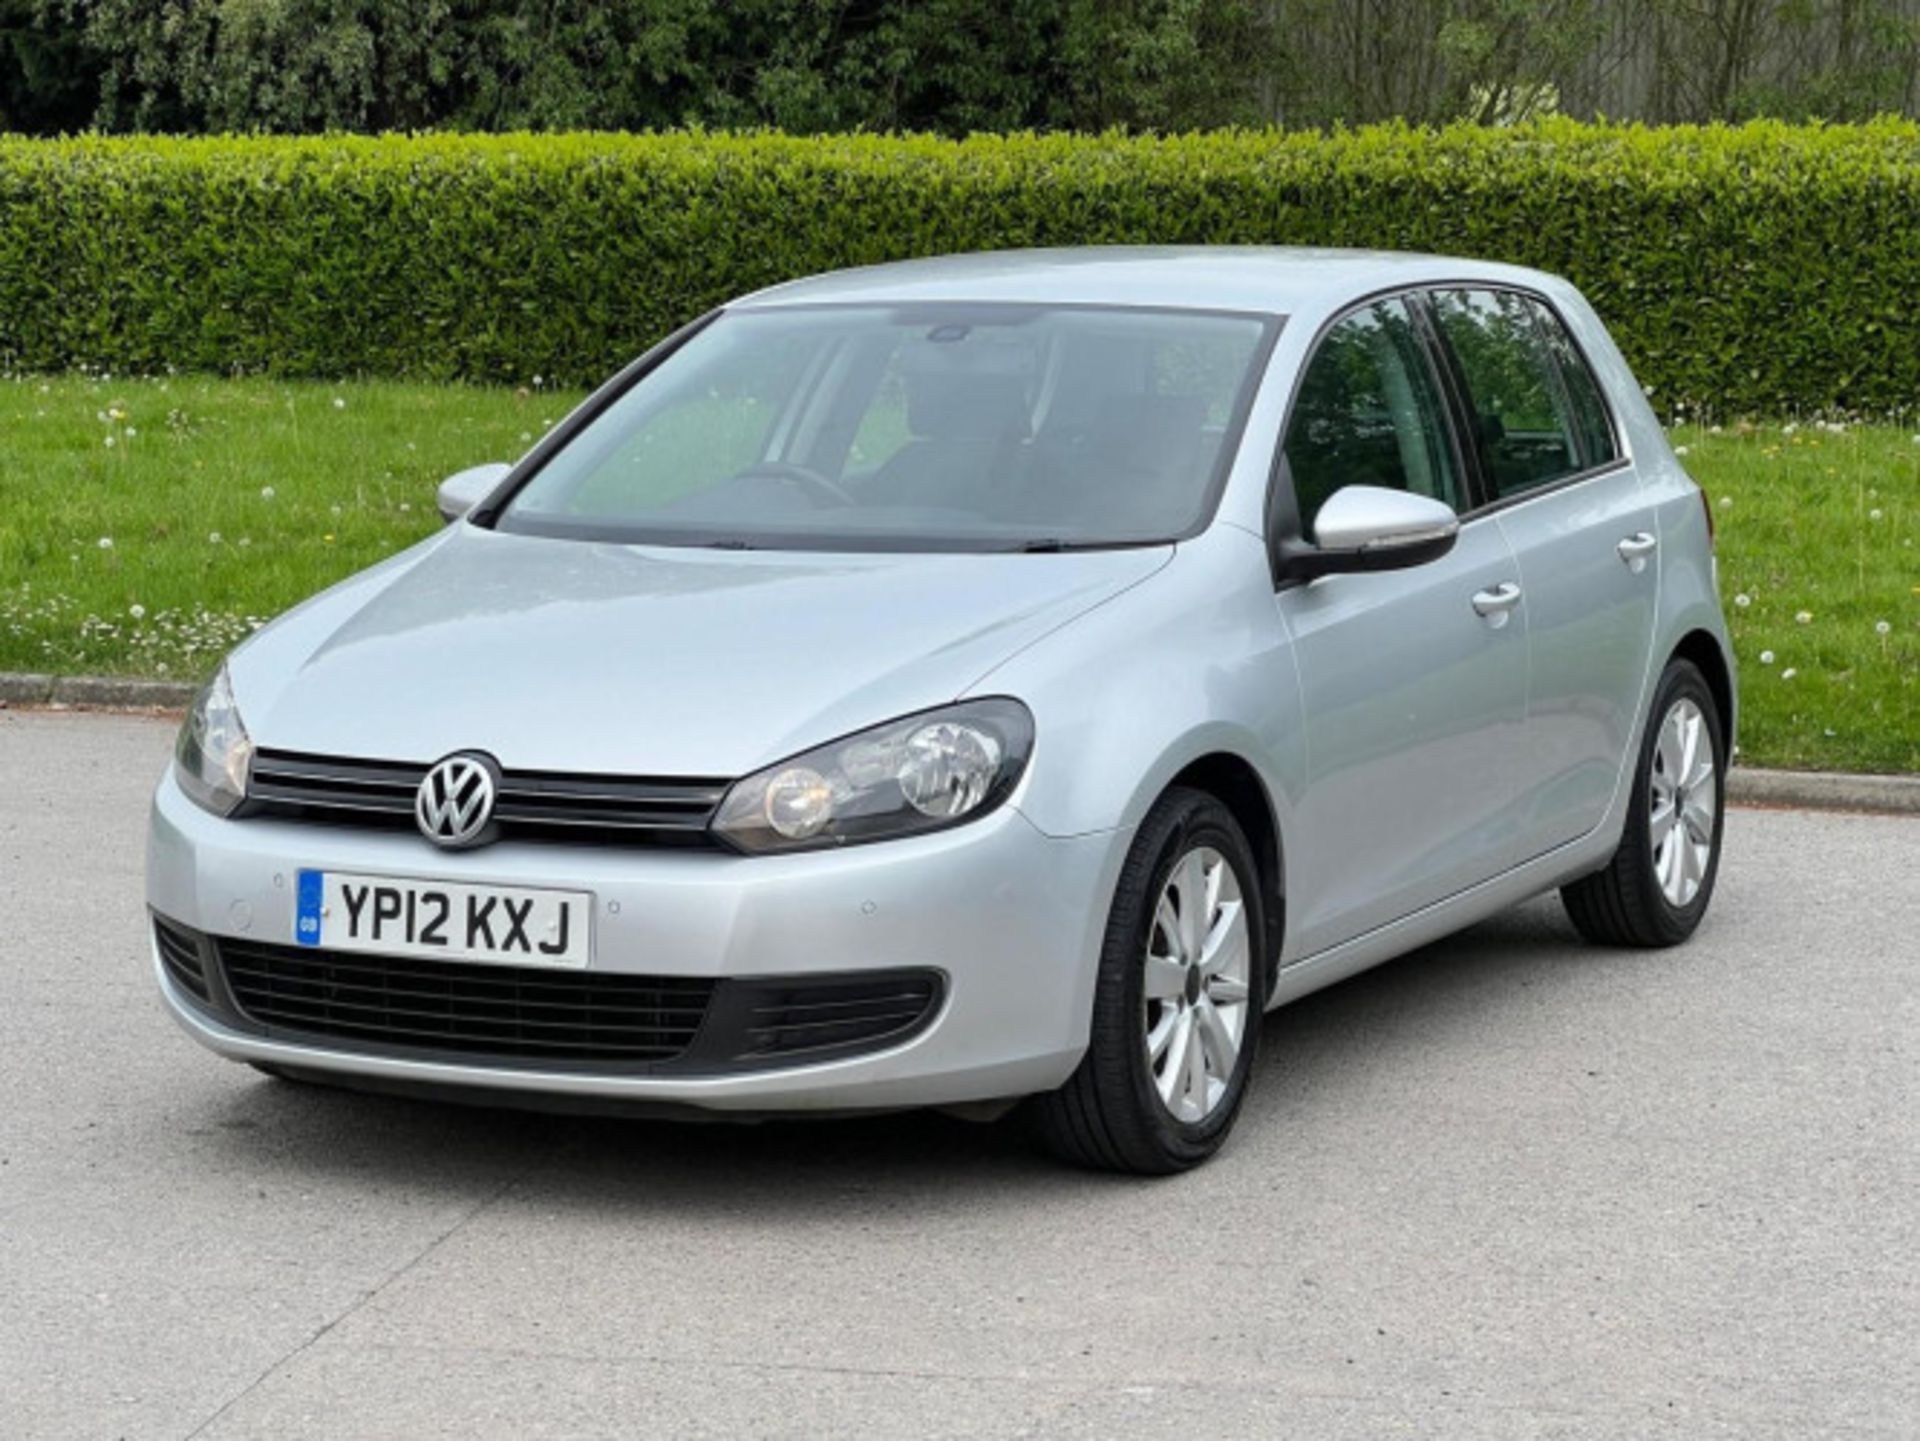 IMPECCABLE 2012 VOLKSWAGEN GOLF 1.6 TDI MATCH >>--NO VAT ON HAMMER--<< - Image 2 of 116